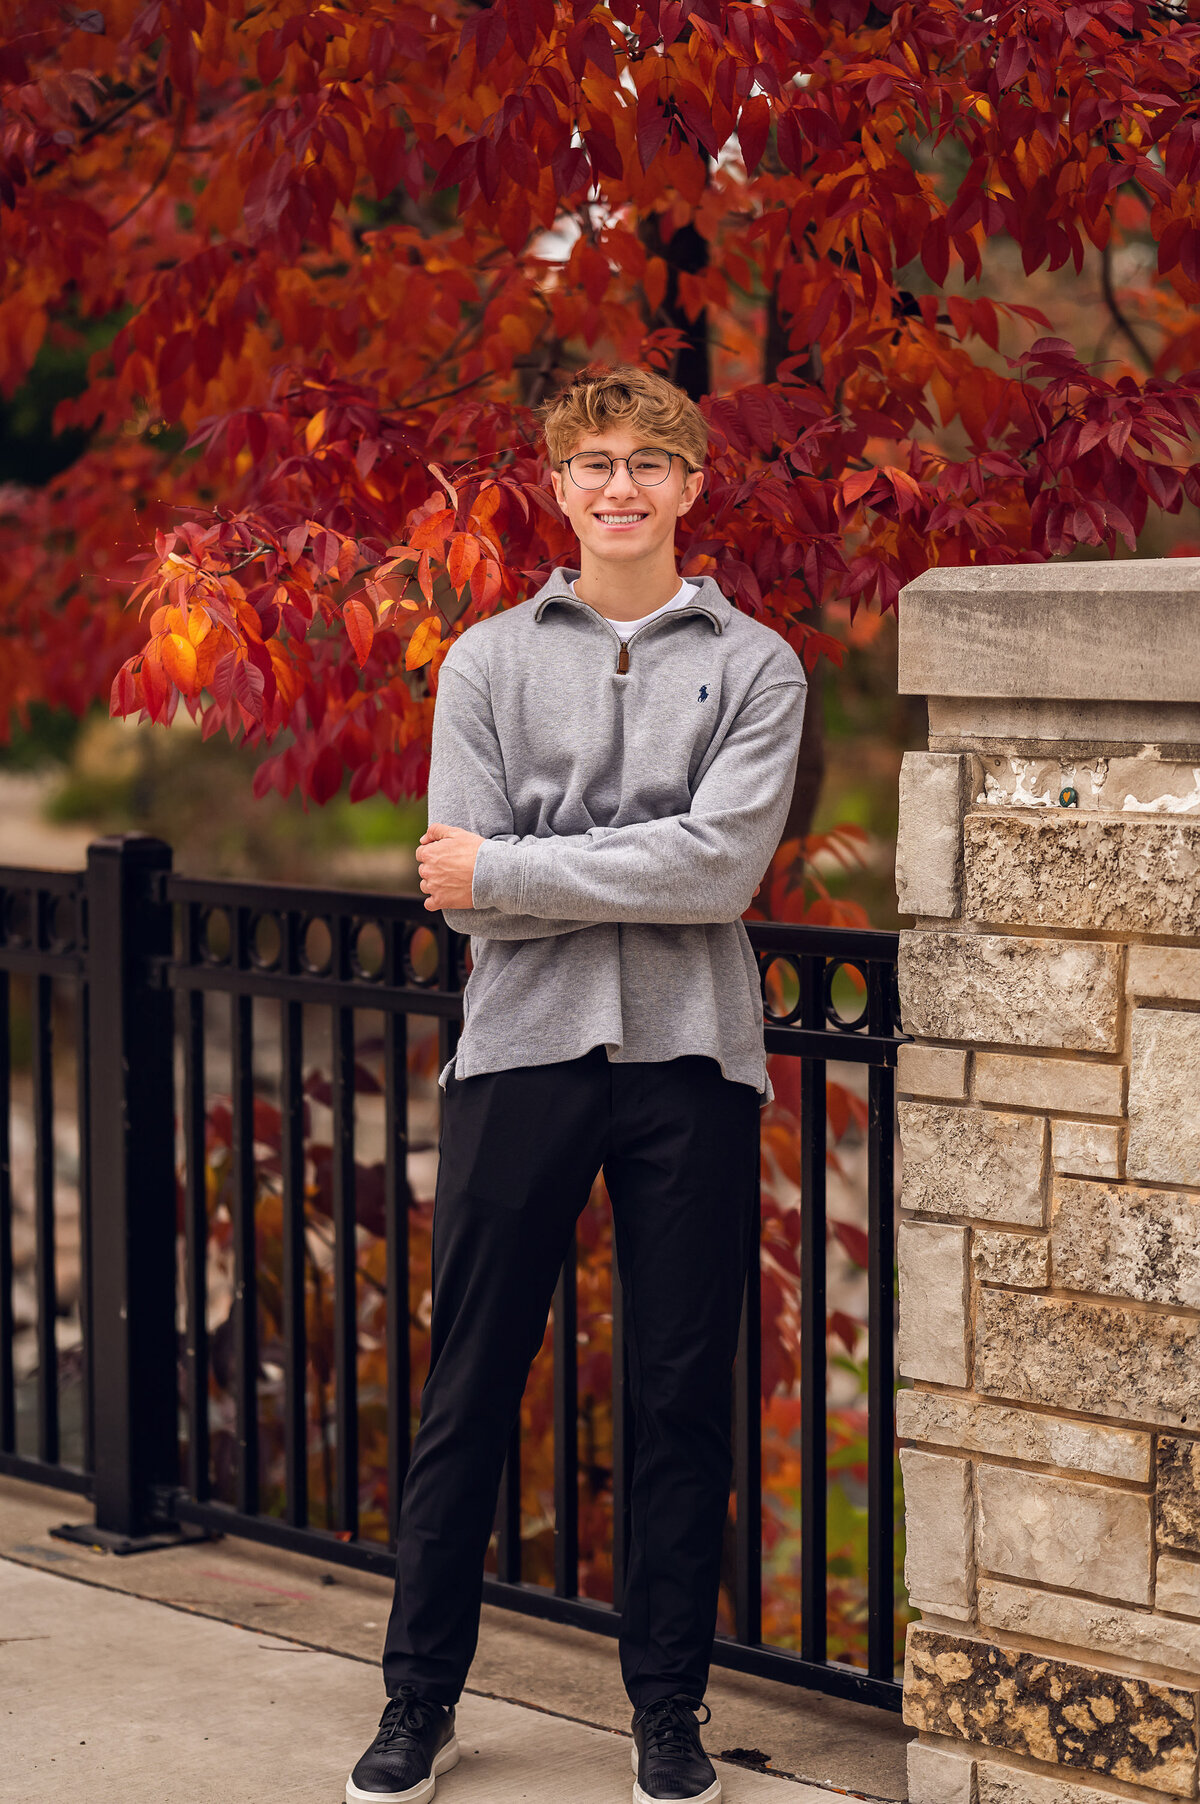 A senior student from Waukesha West High School stands in Frame Park surrounded by the red leaves of Fall.